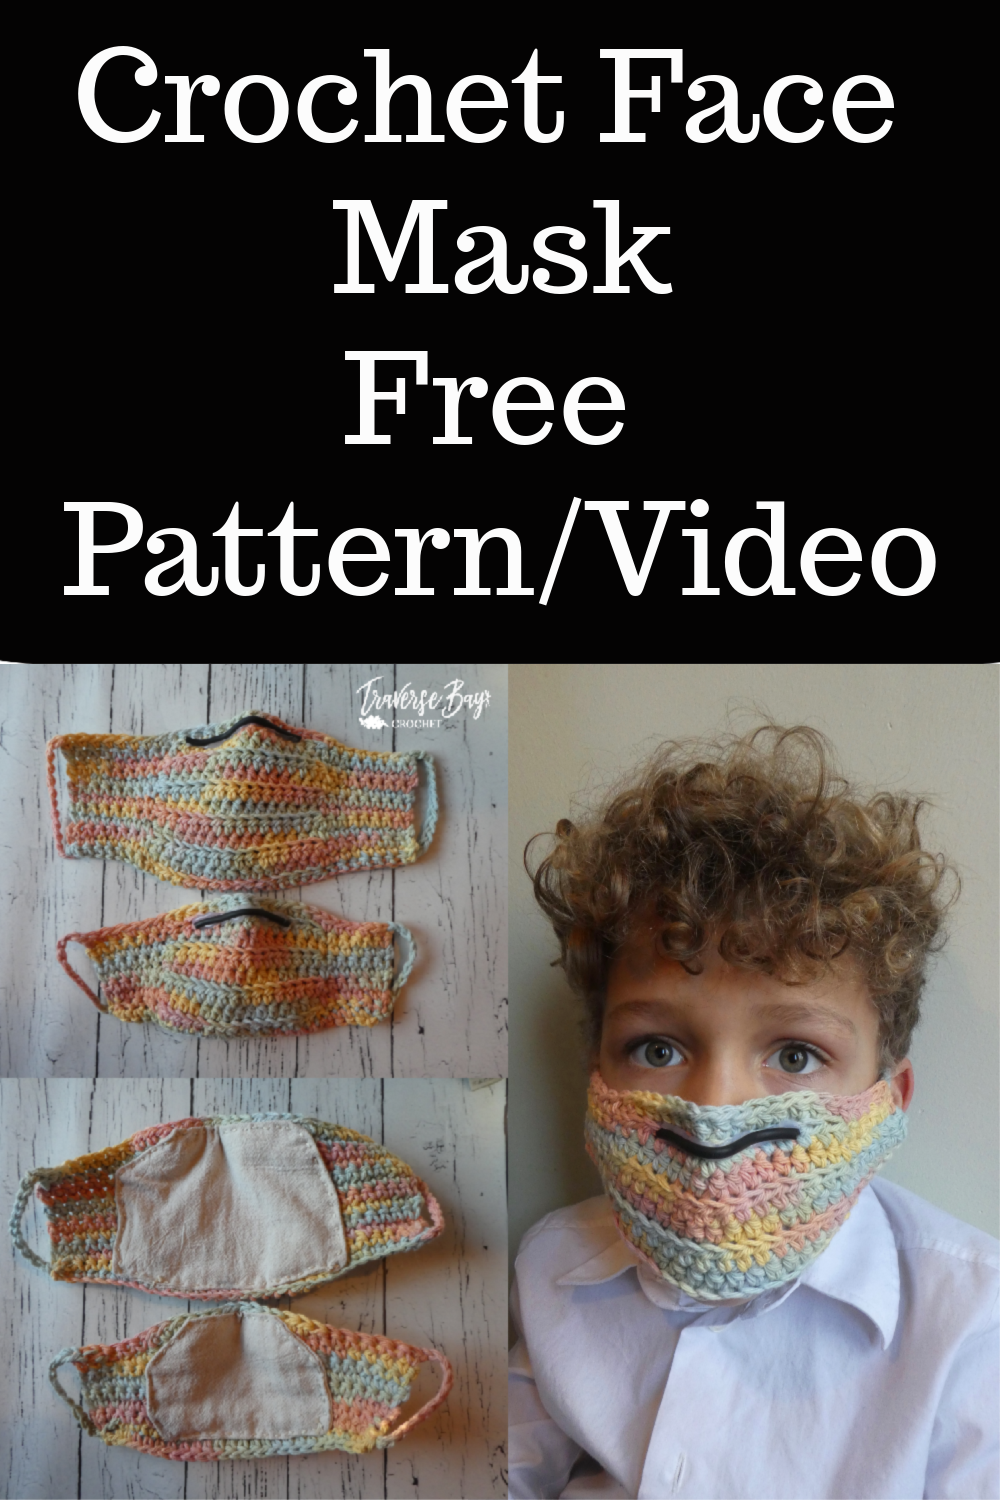 Face Mask Free Crochet Pattern and Video Tutorial